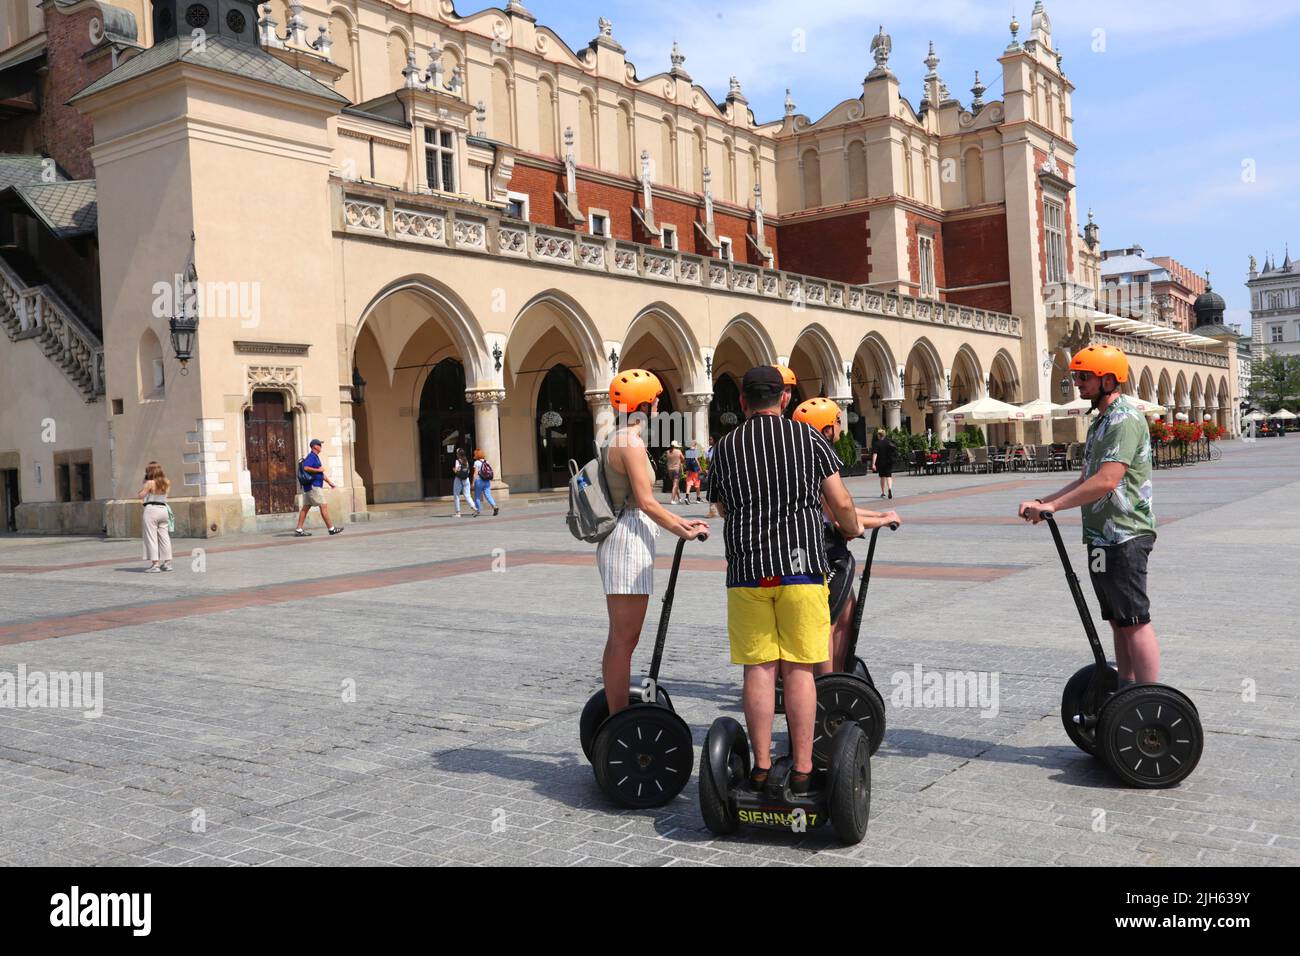 Cracow. Krakow. Poland. Group of tourists on segways with guide in front of Sukiennice Cloth Hall in the middle of Main Market Square, center of the t Stock Photo